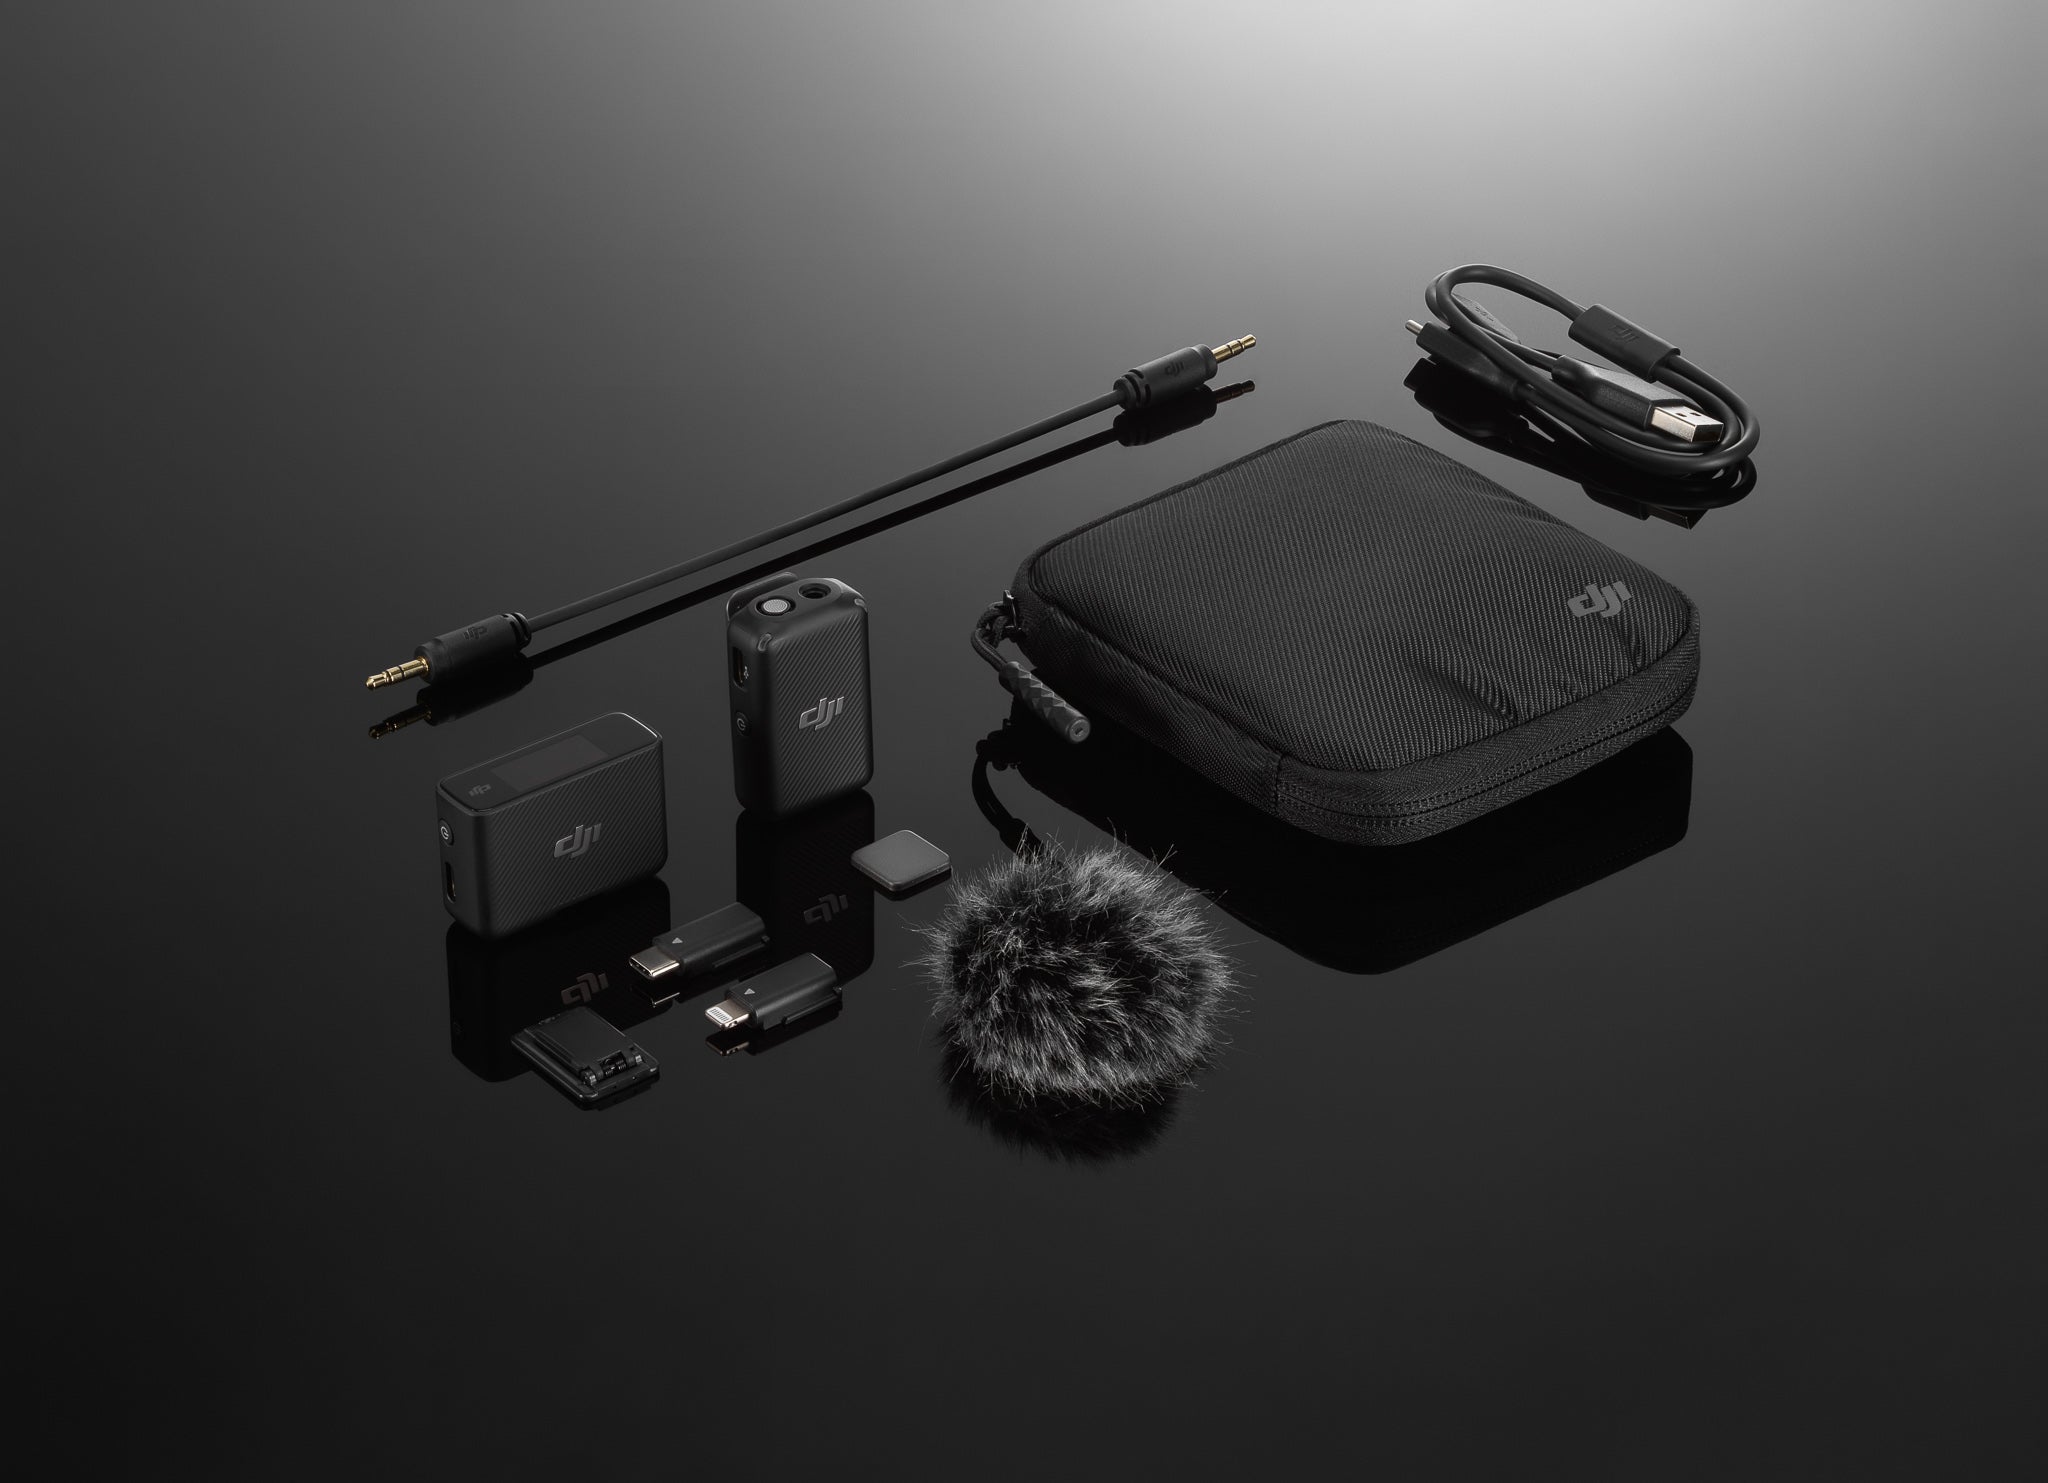 DJI Mic Wireless Microphone Kit - (1Tx + 1Rx) Includes 1 Transmitters, 1 Receiver and Charging Case